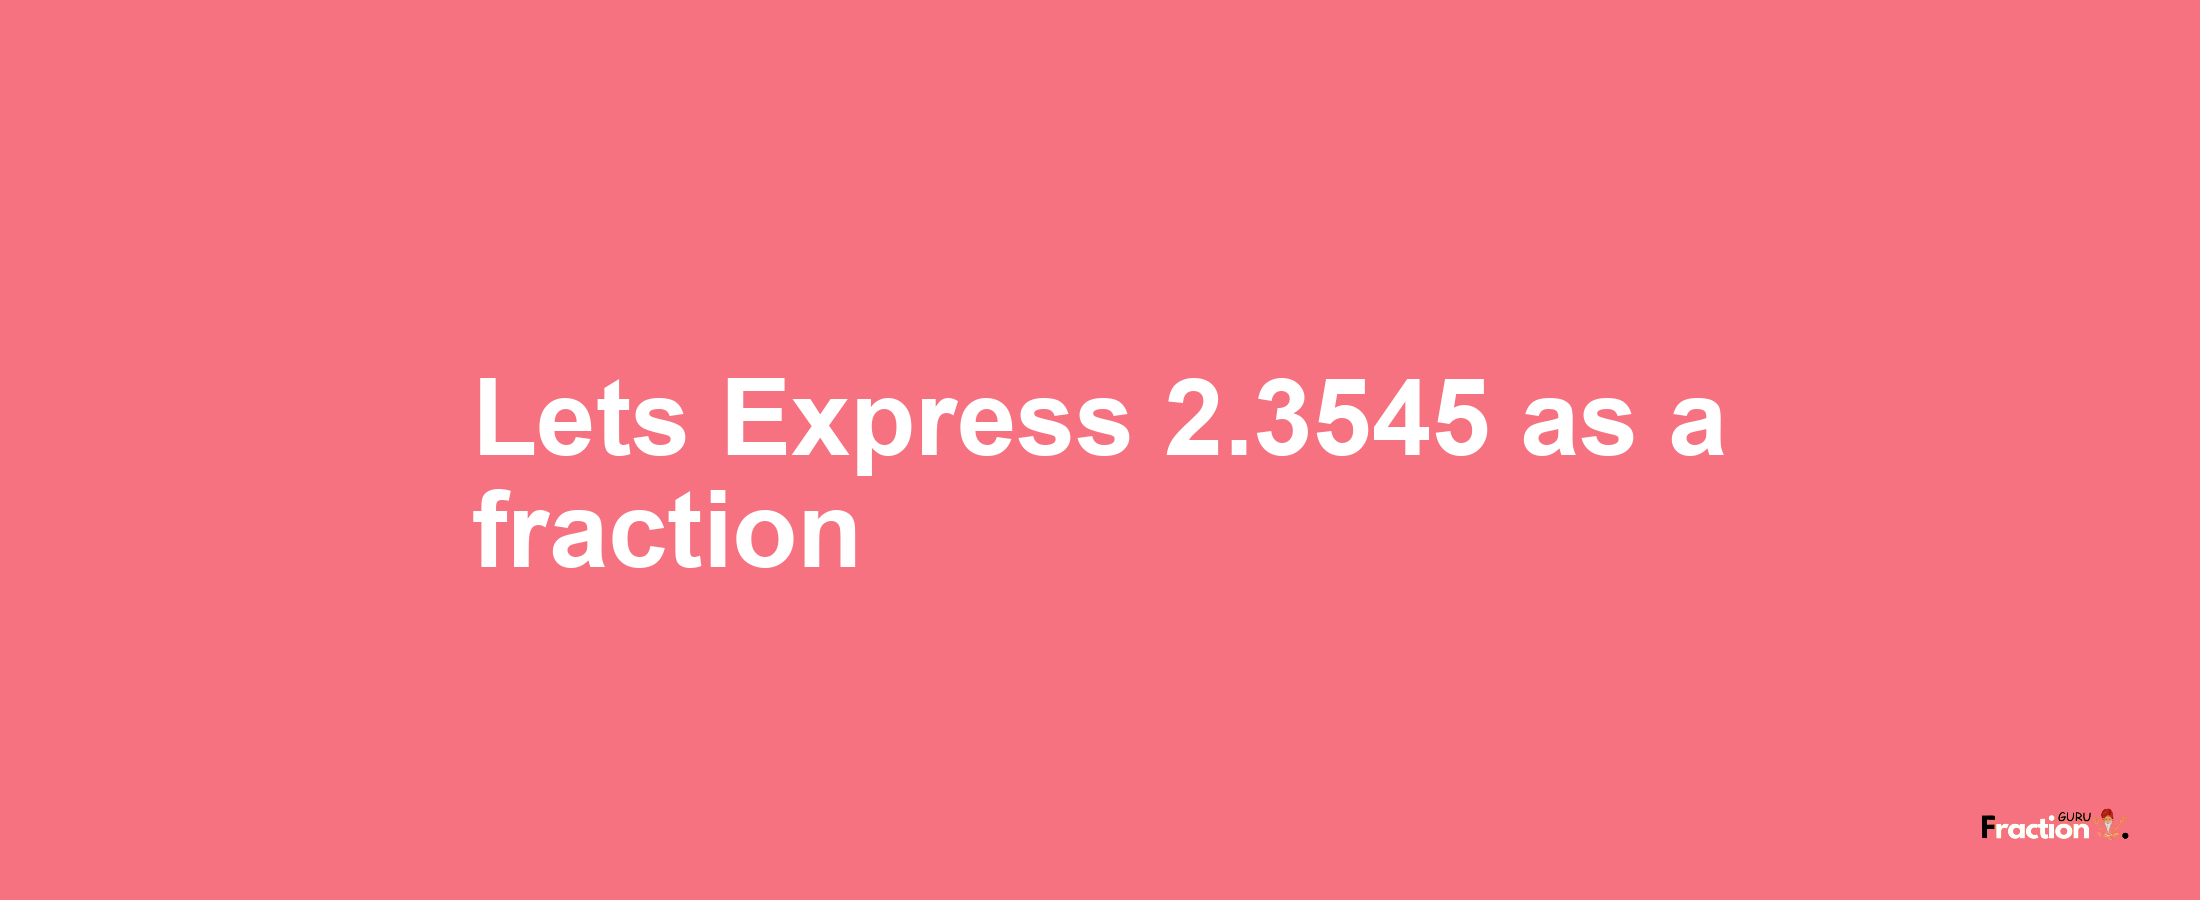 Lets Express 2.3545 as afraction